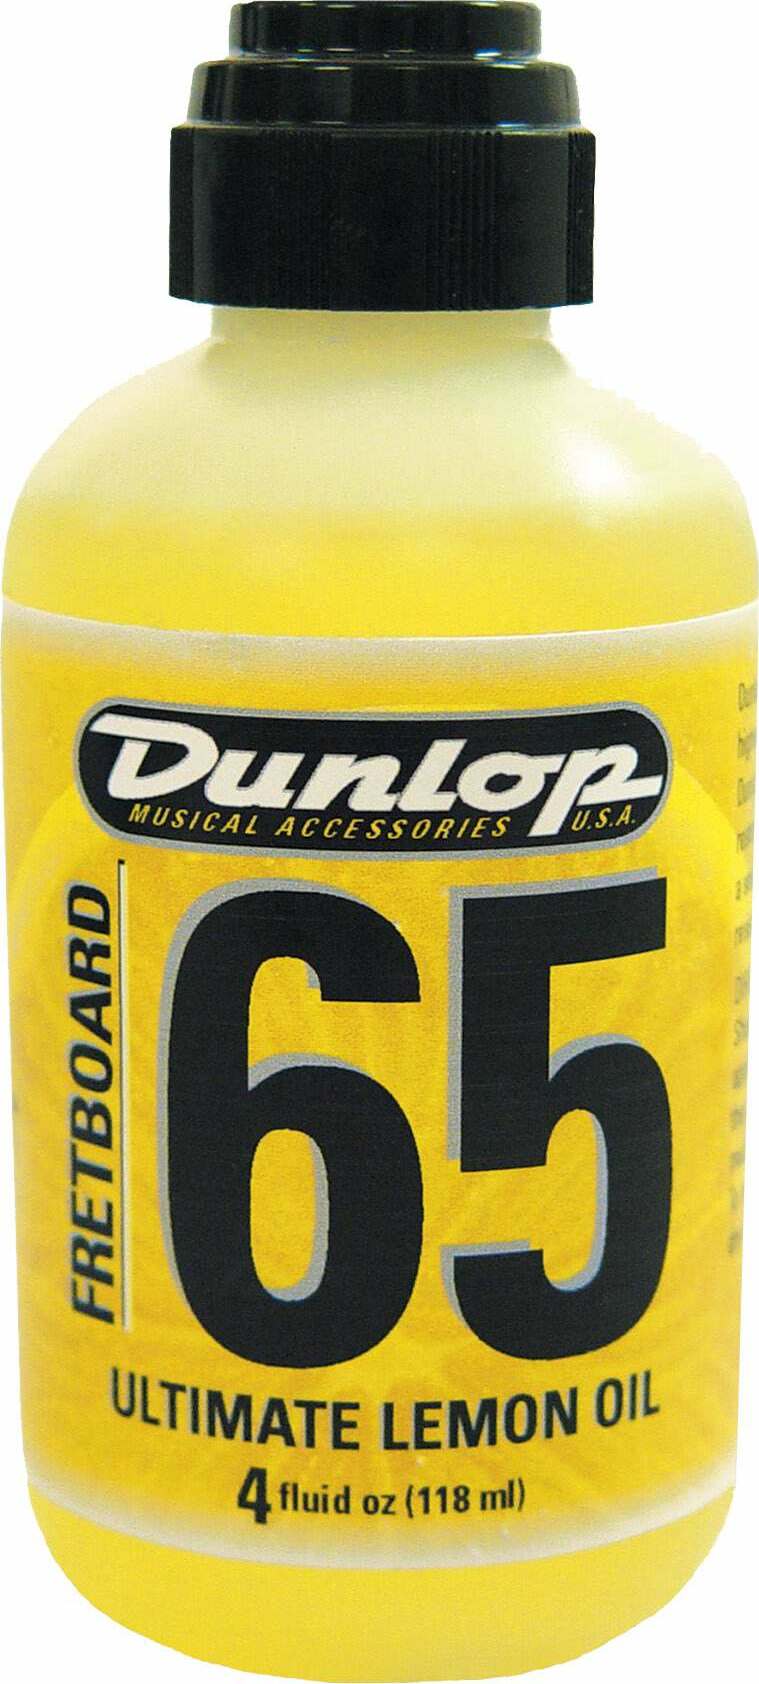 Jim Dunlop 6554 65 Fretboard Ultimate Lemon Oil 118ml - Care & Cleaning - Main picture